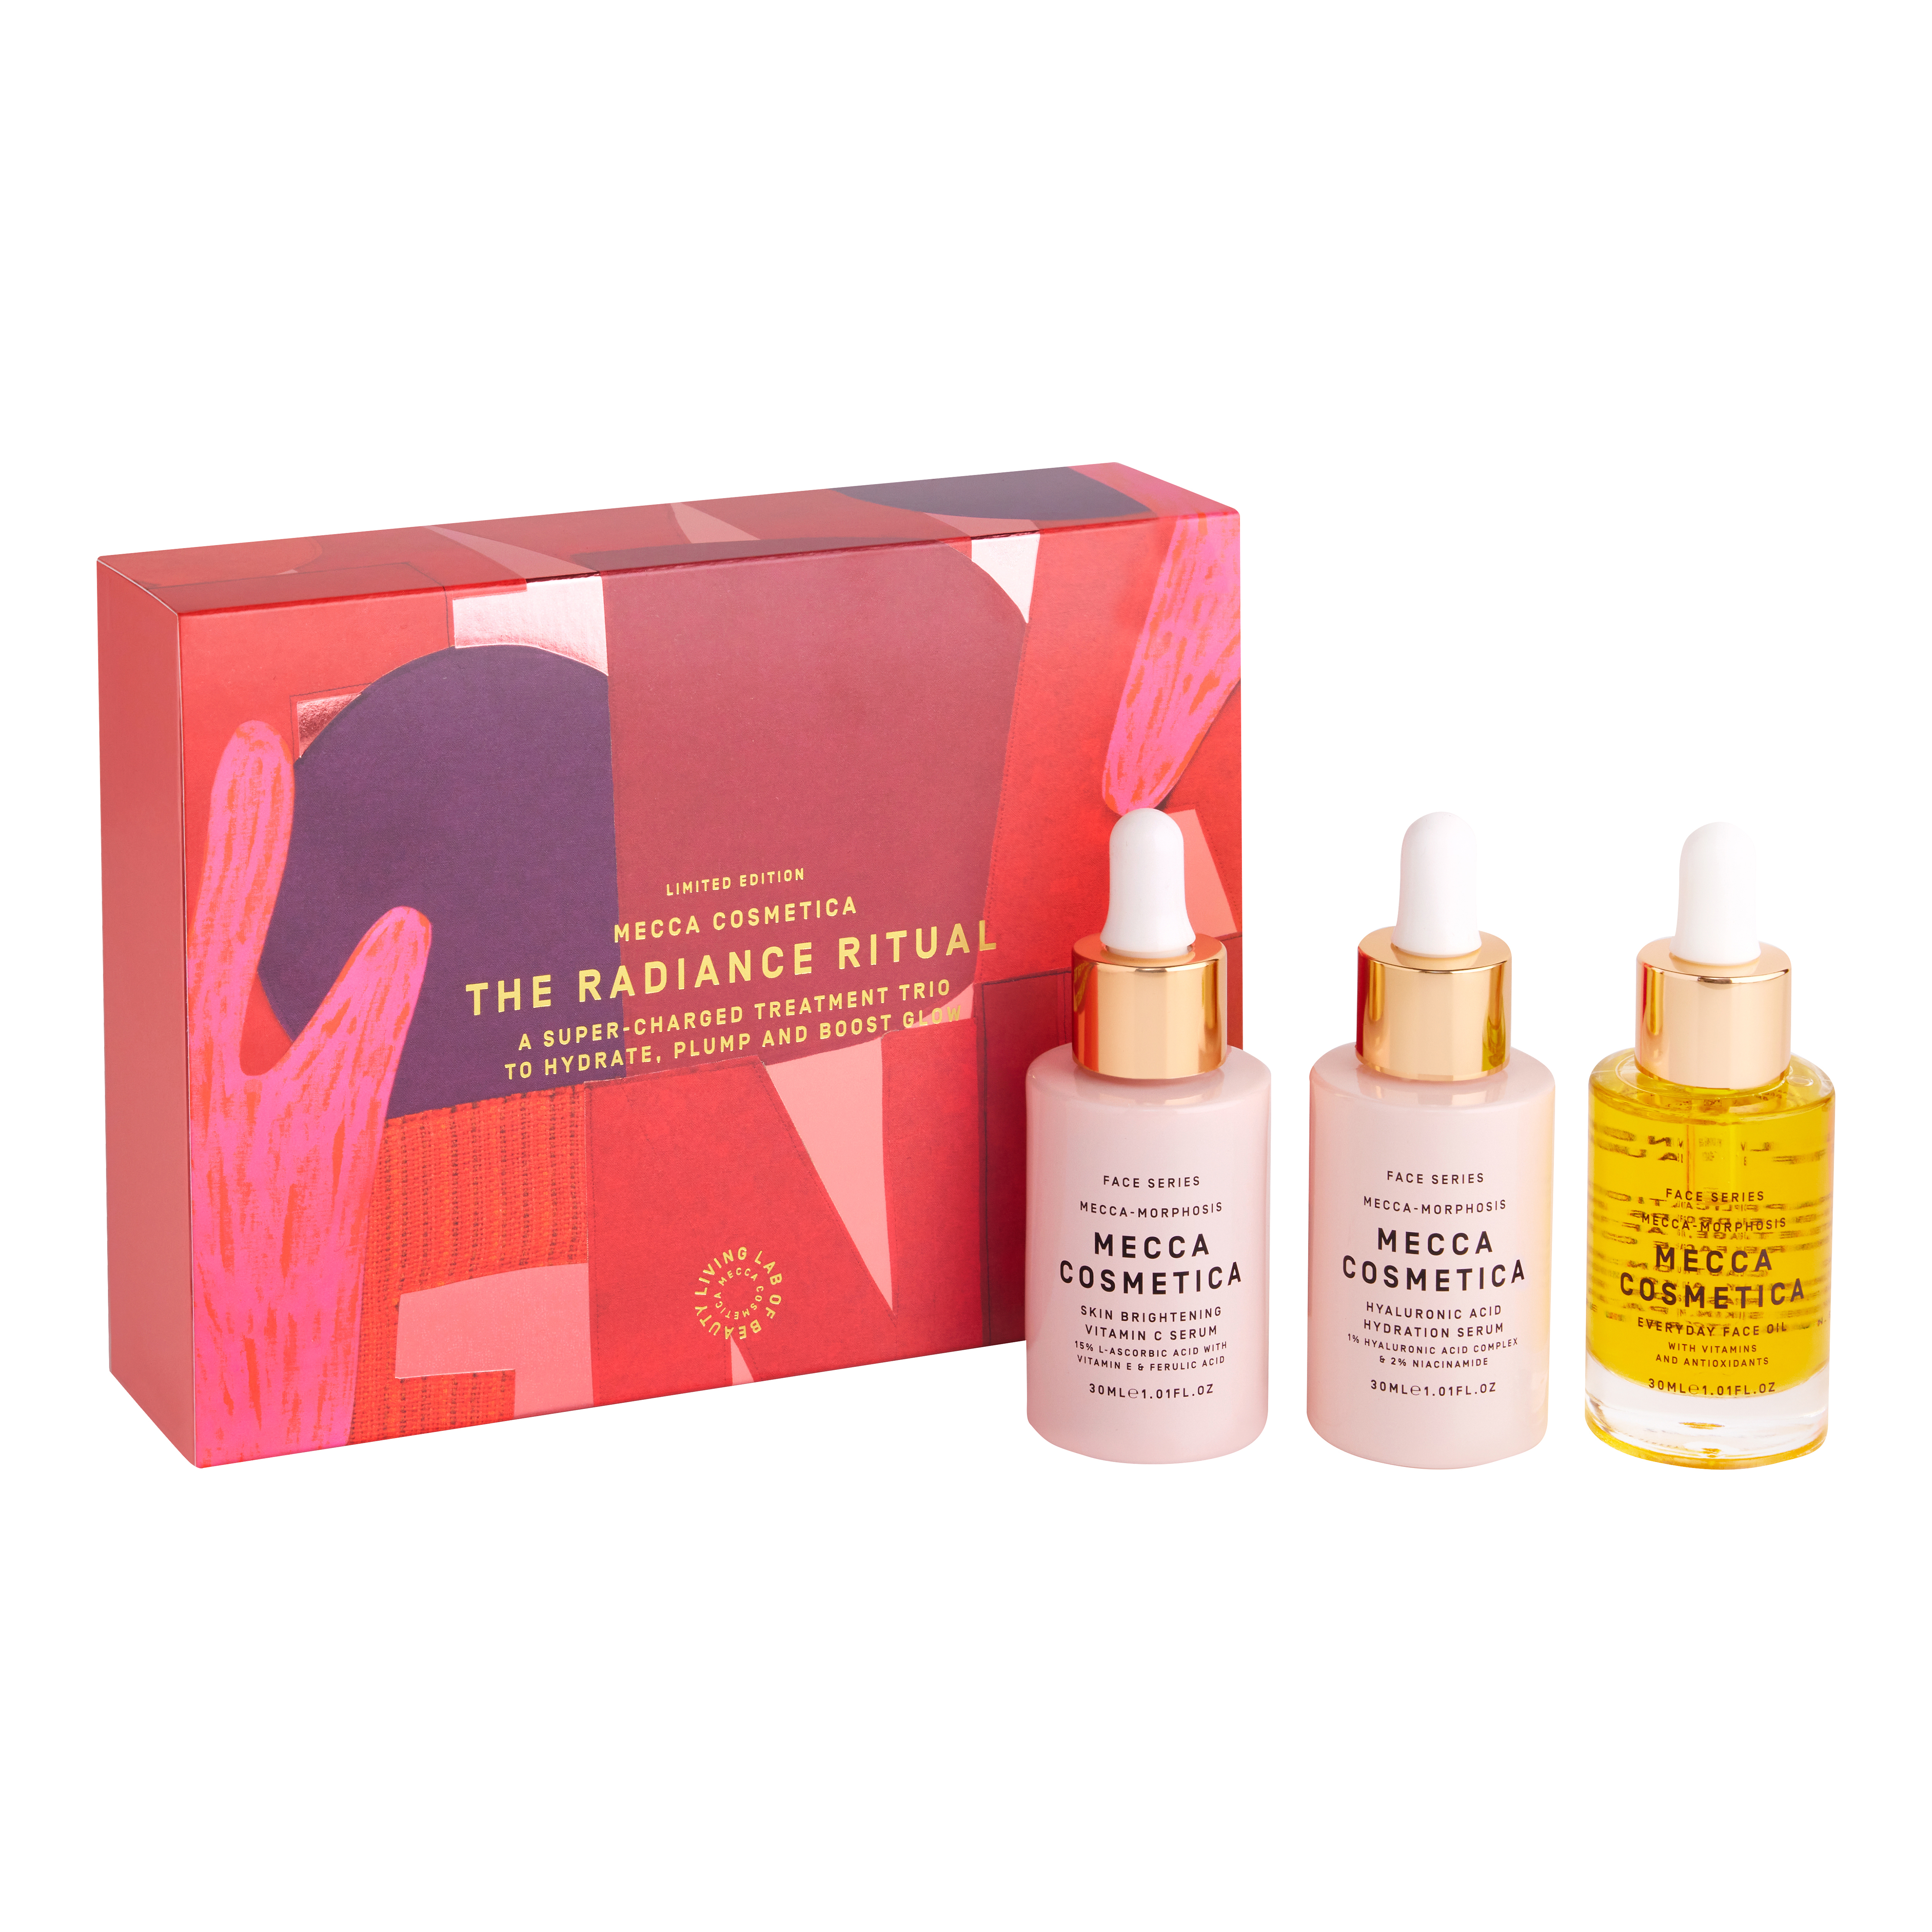 Mecca Cosmetica Holiday - The Radiance Ritual